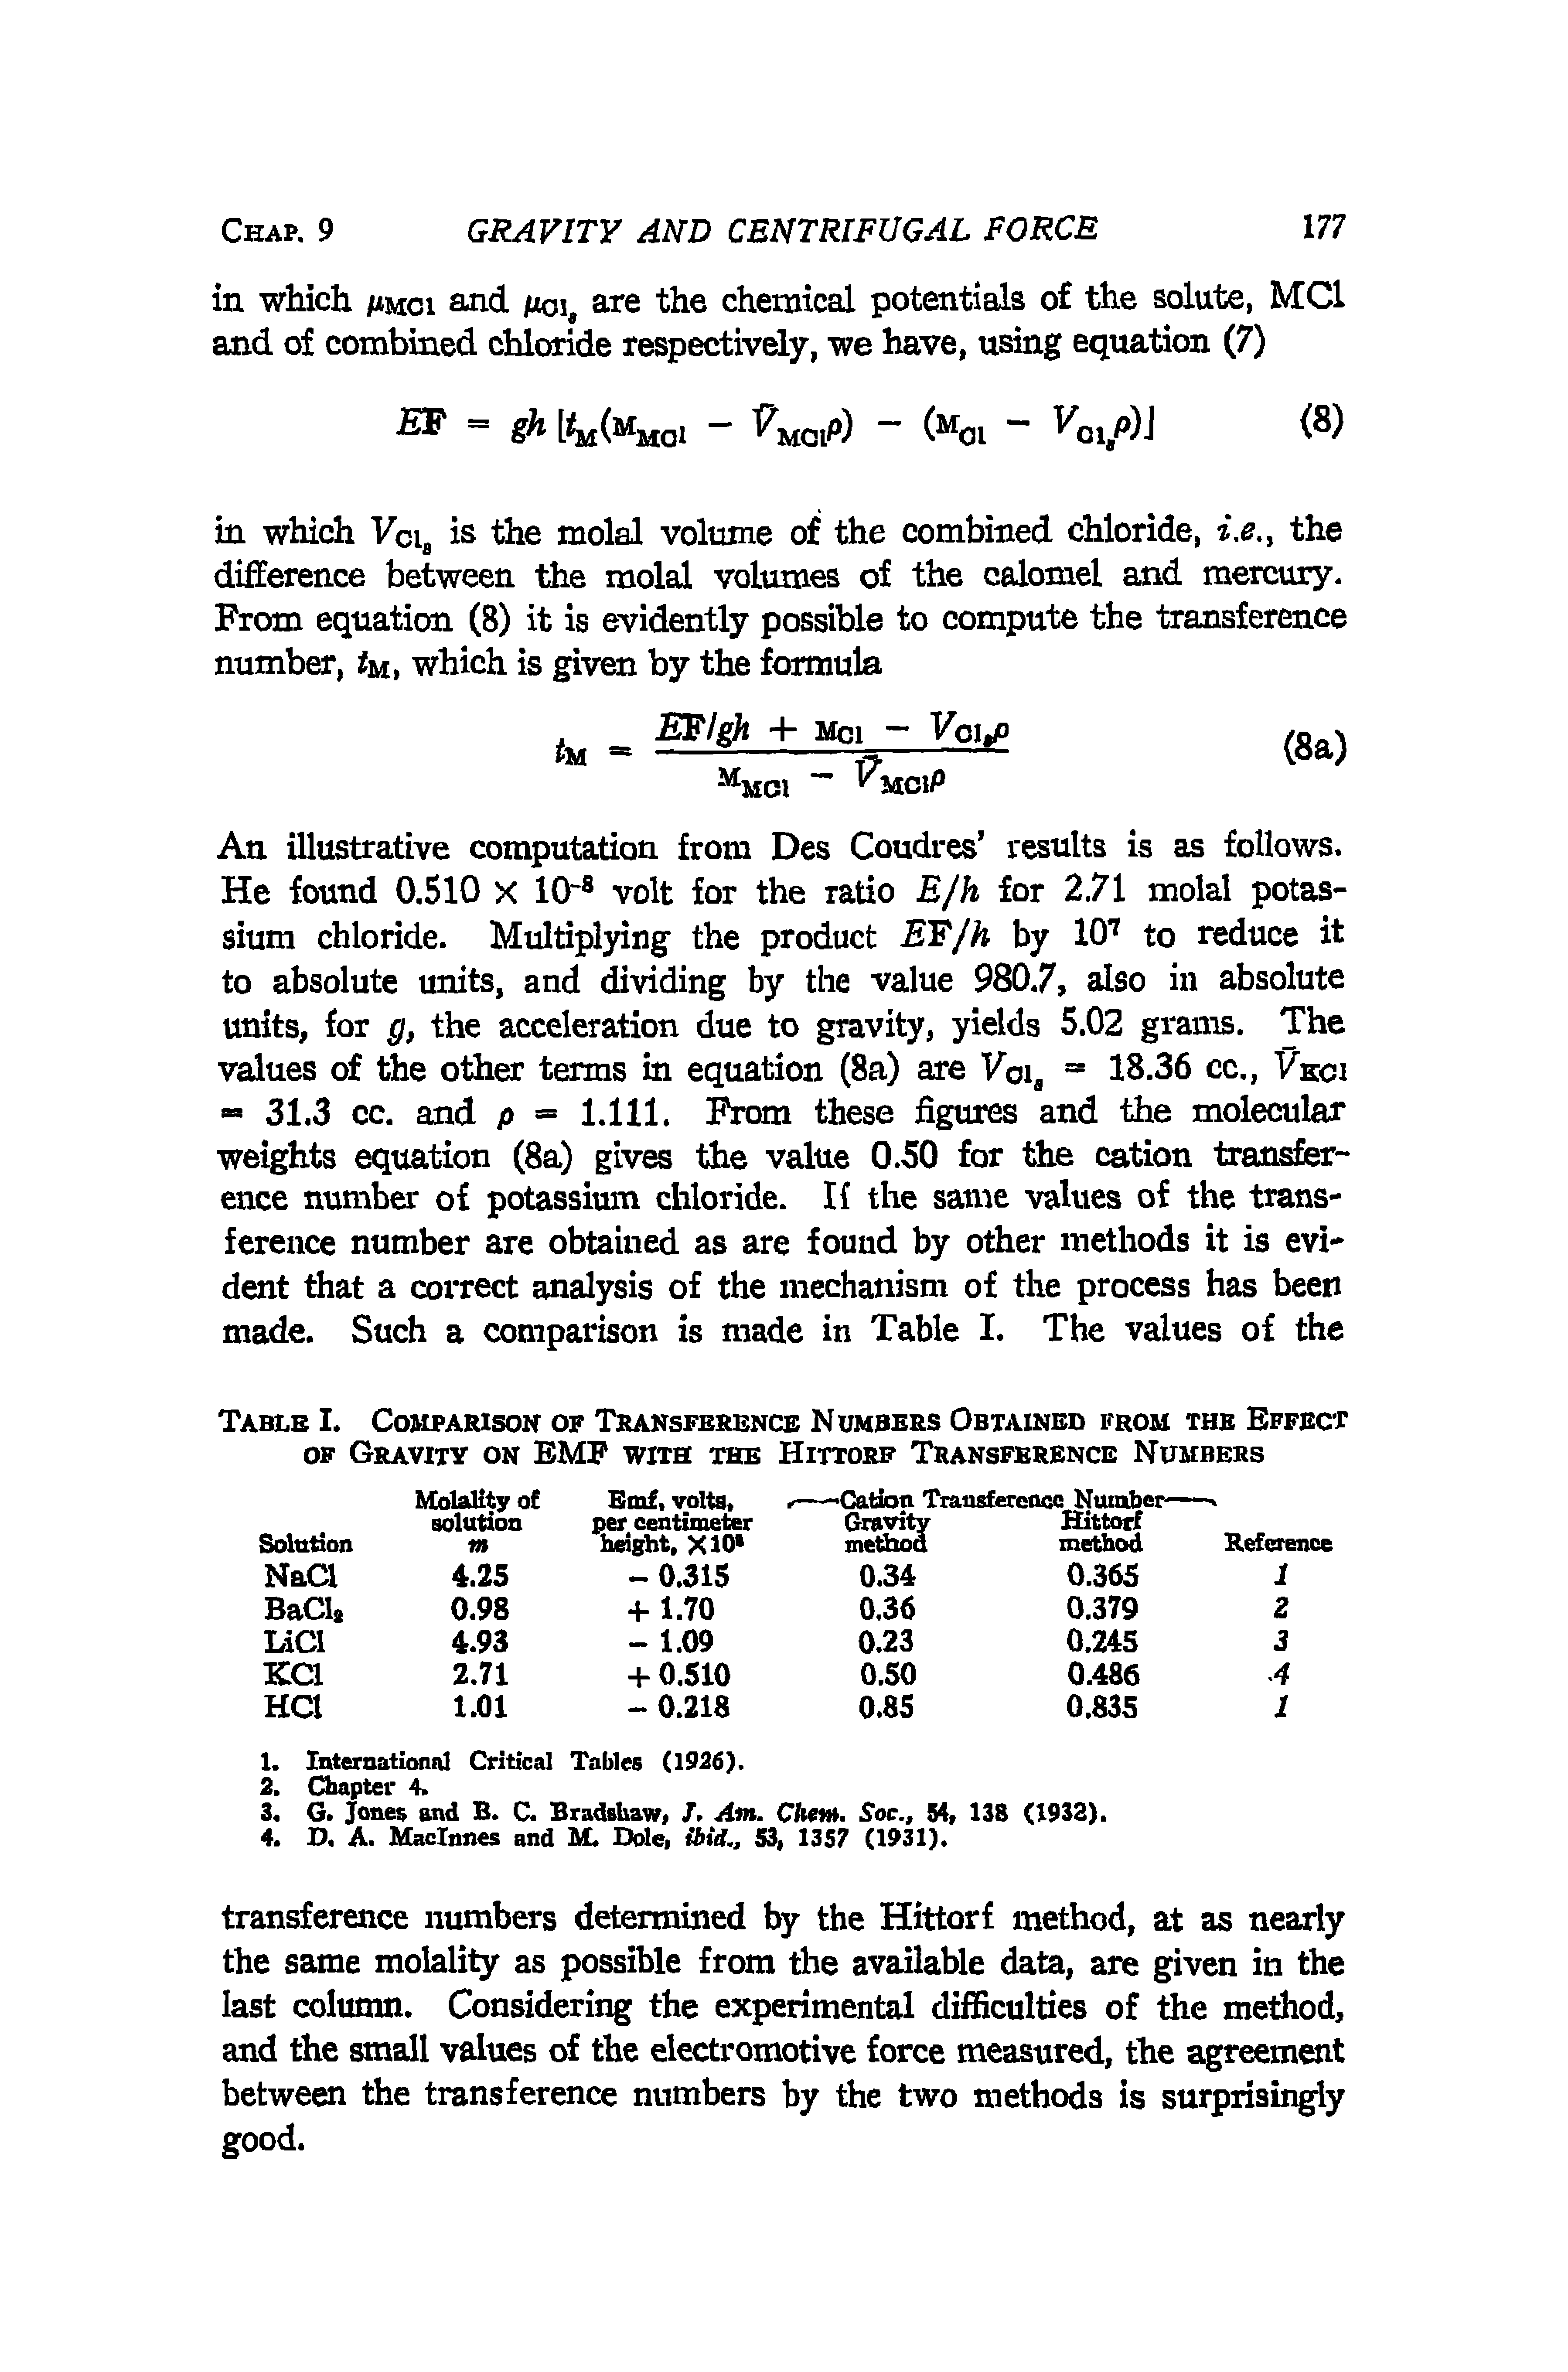 Table I. Comparison of Transference Numbers Obtained from the Effect of Gravity on EMF with the Hittorf Transference Numbers...